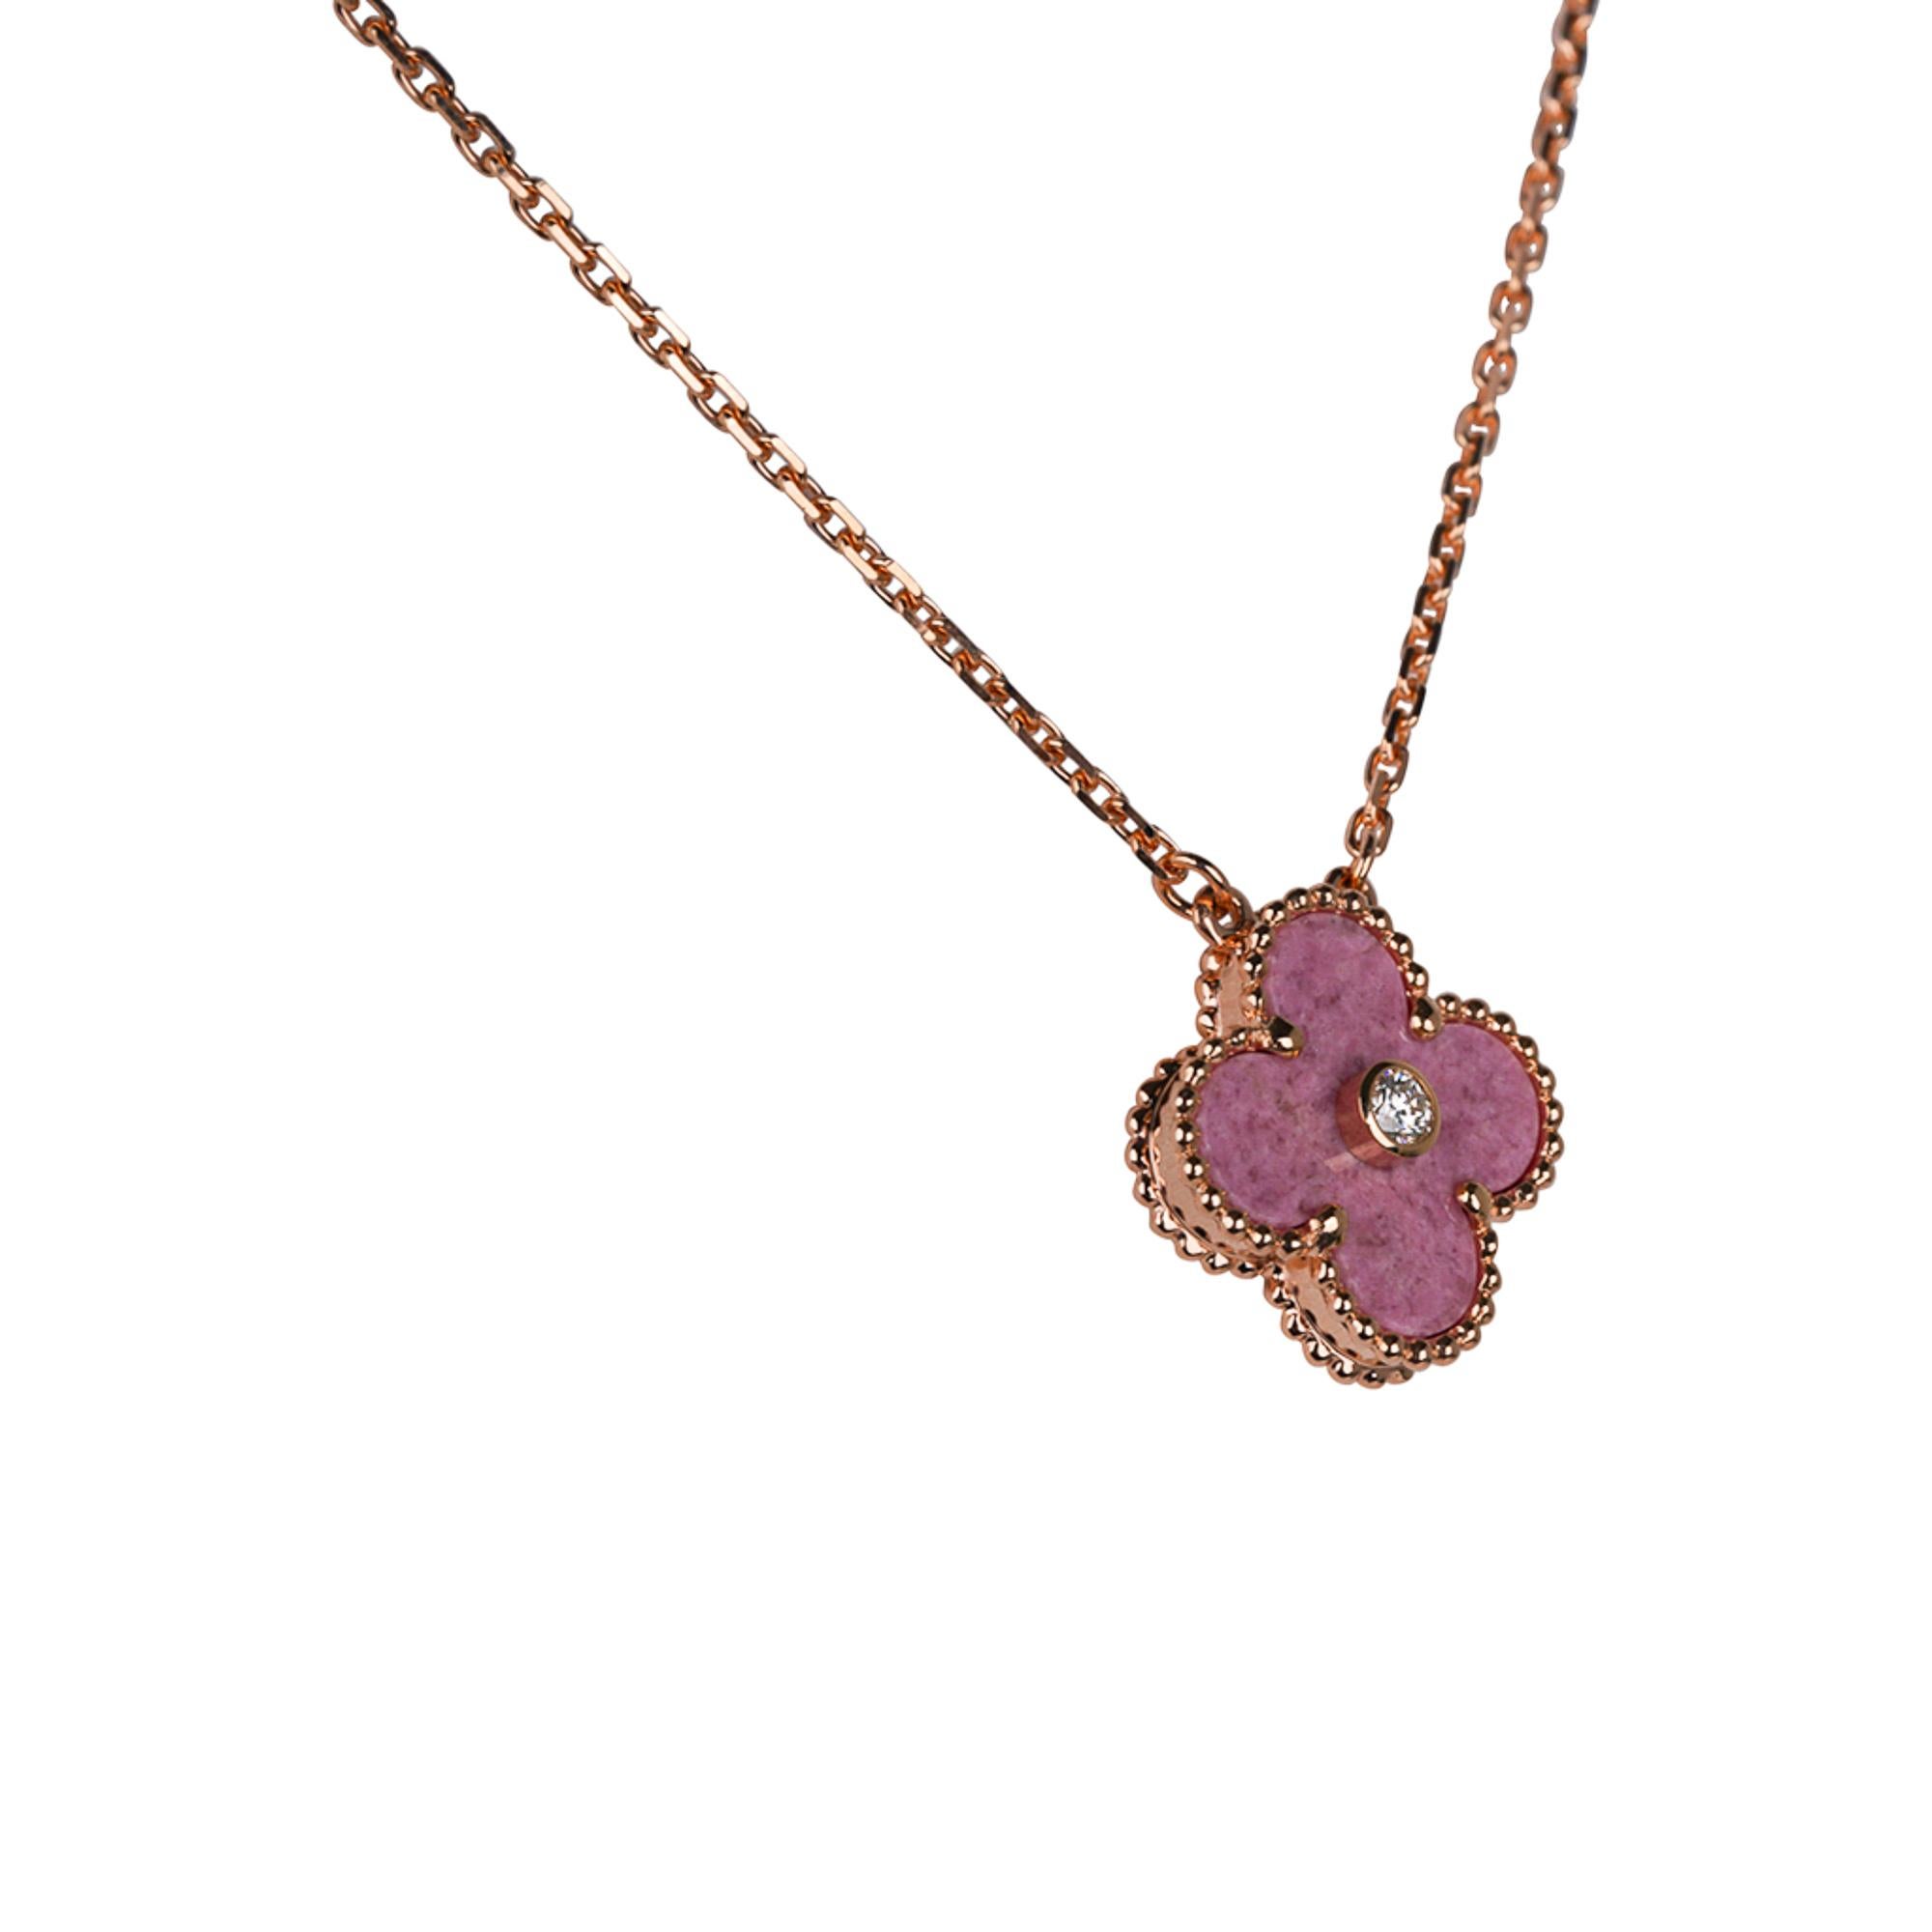 Mightychic offers a Van Cleef & Arpels Vintage Alhambra 2021 Limited Edition Holiday Pendant.
Highly collectible, this necklace is crafted in beautiful soft pink Rhodonite stone with a .05 carat brilliant cut diamond in the center.
Accentuated in